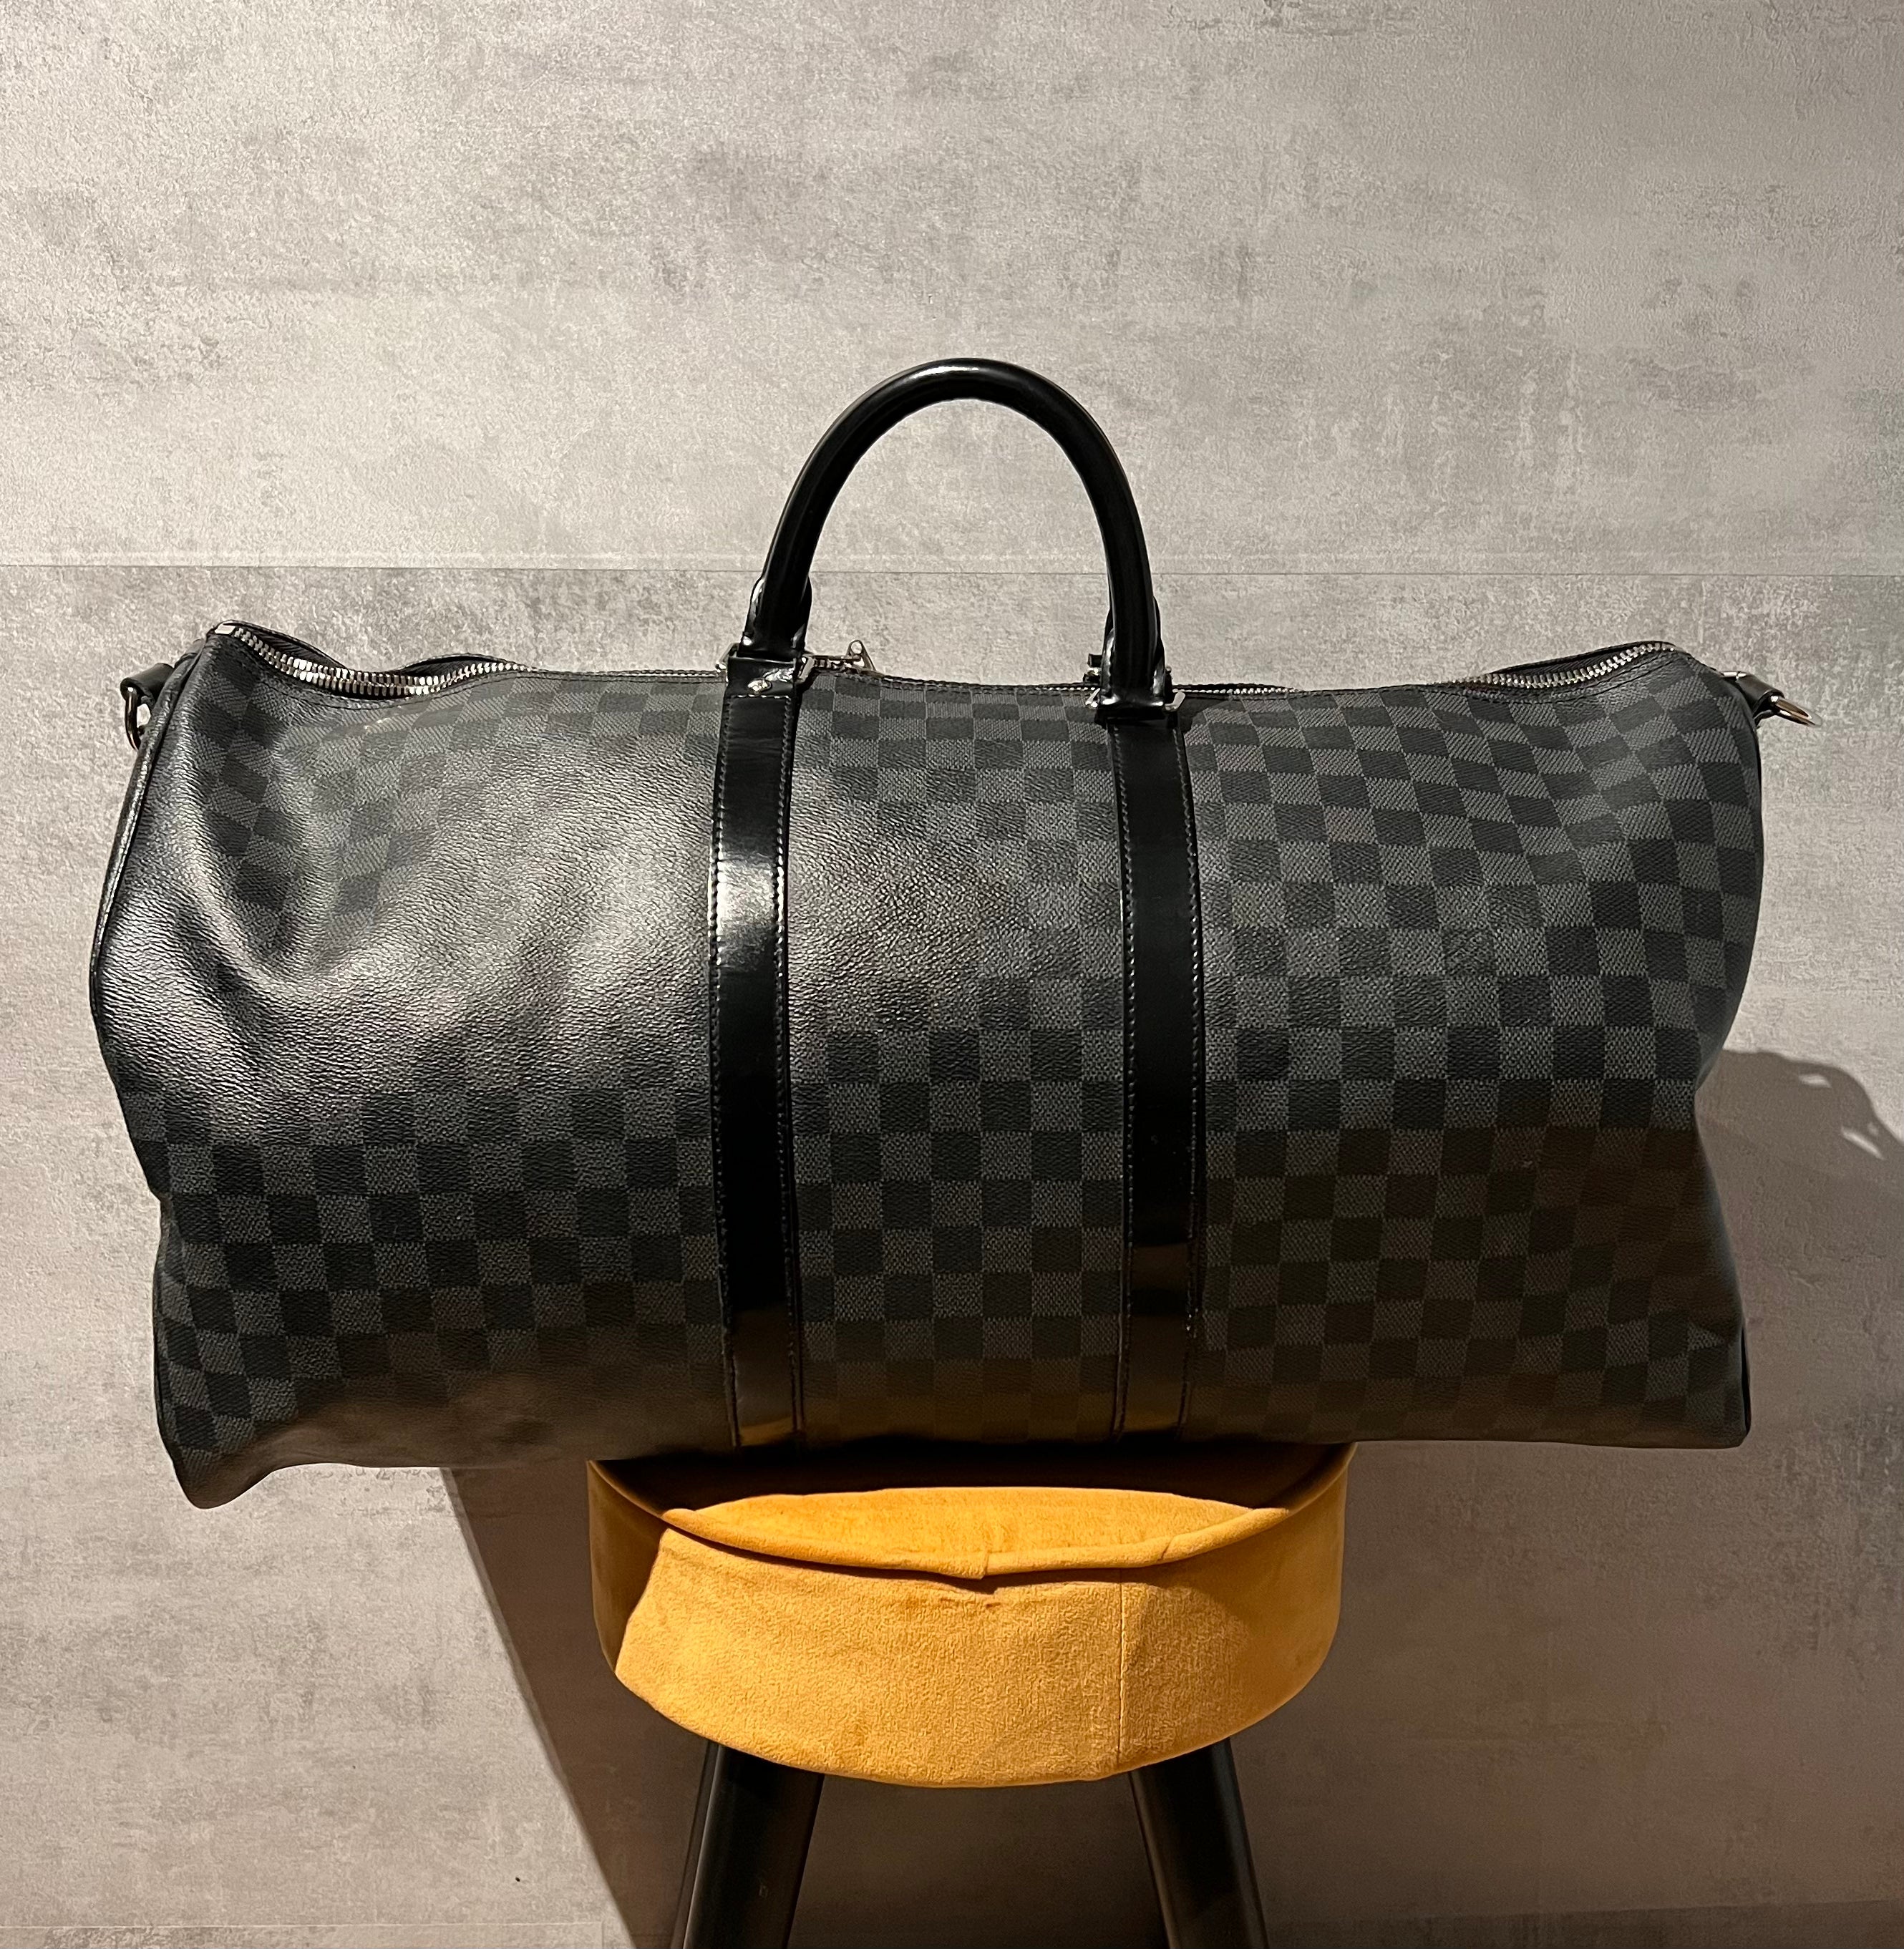 Products by Louis Vuitton: Keepall Bandoulière 55